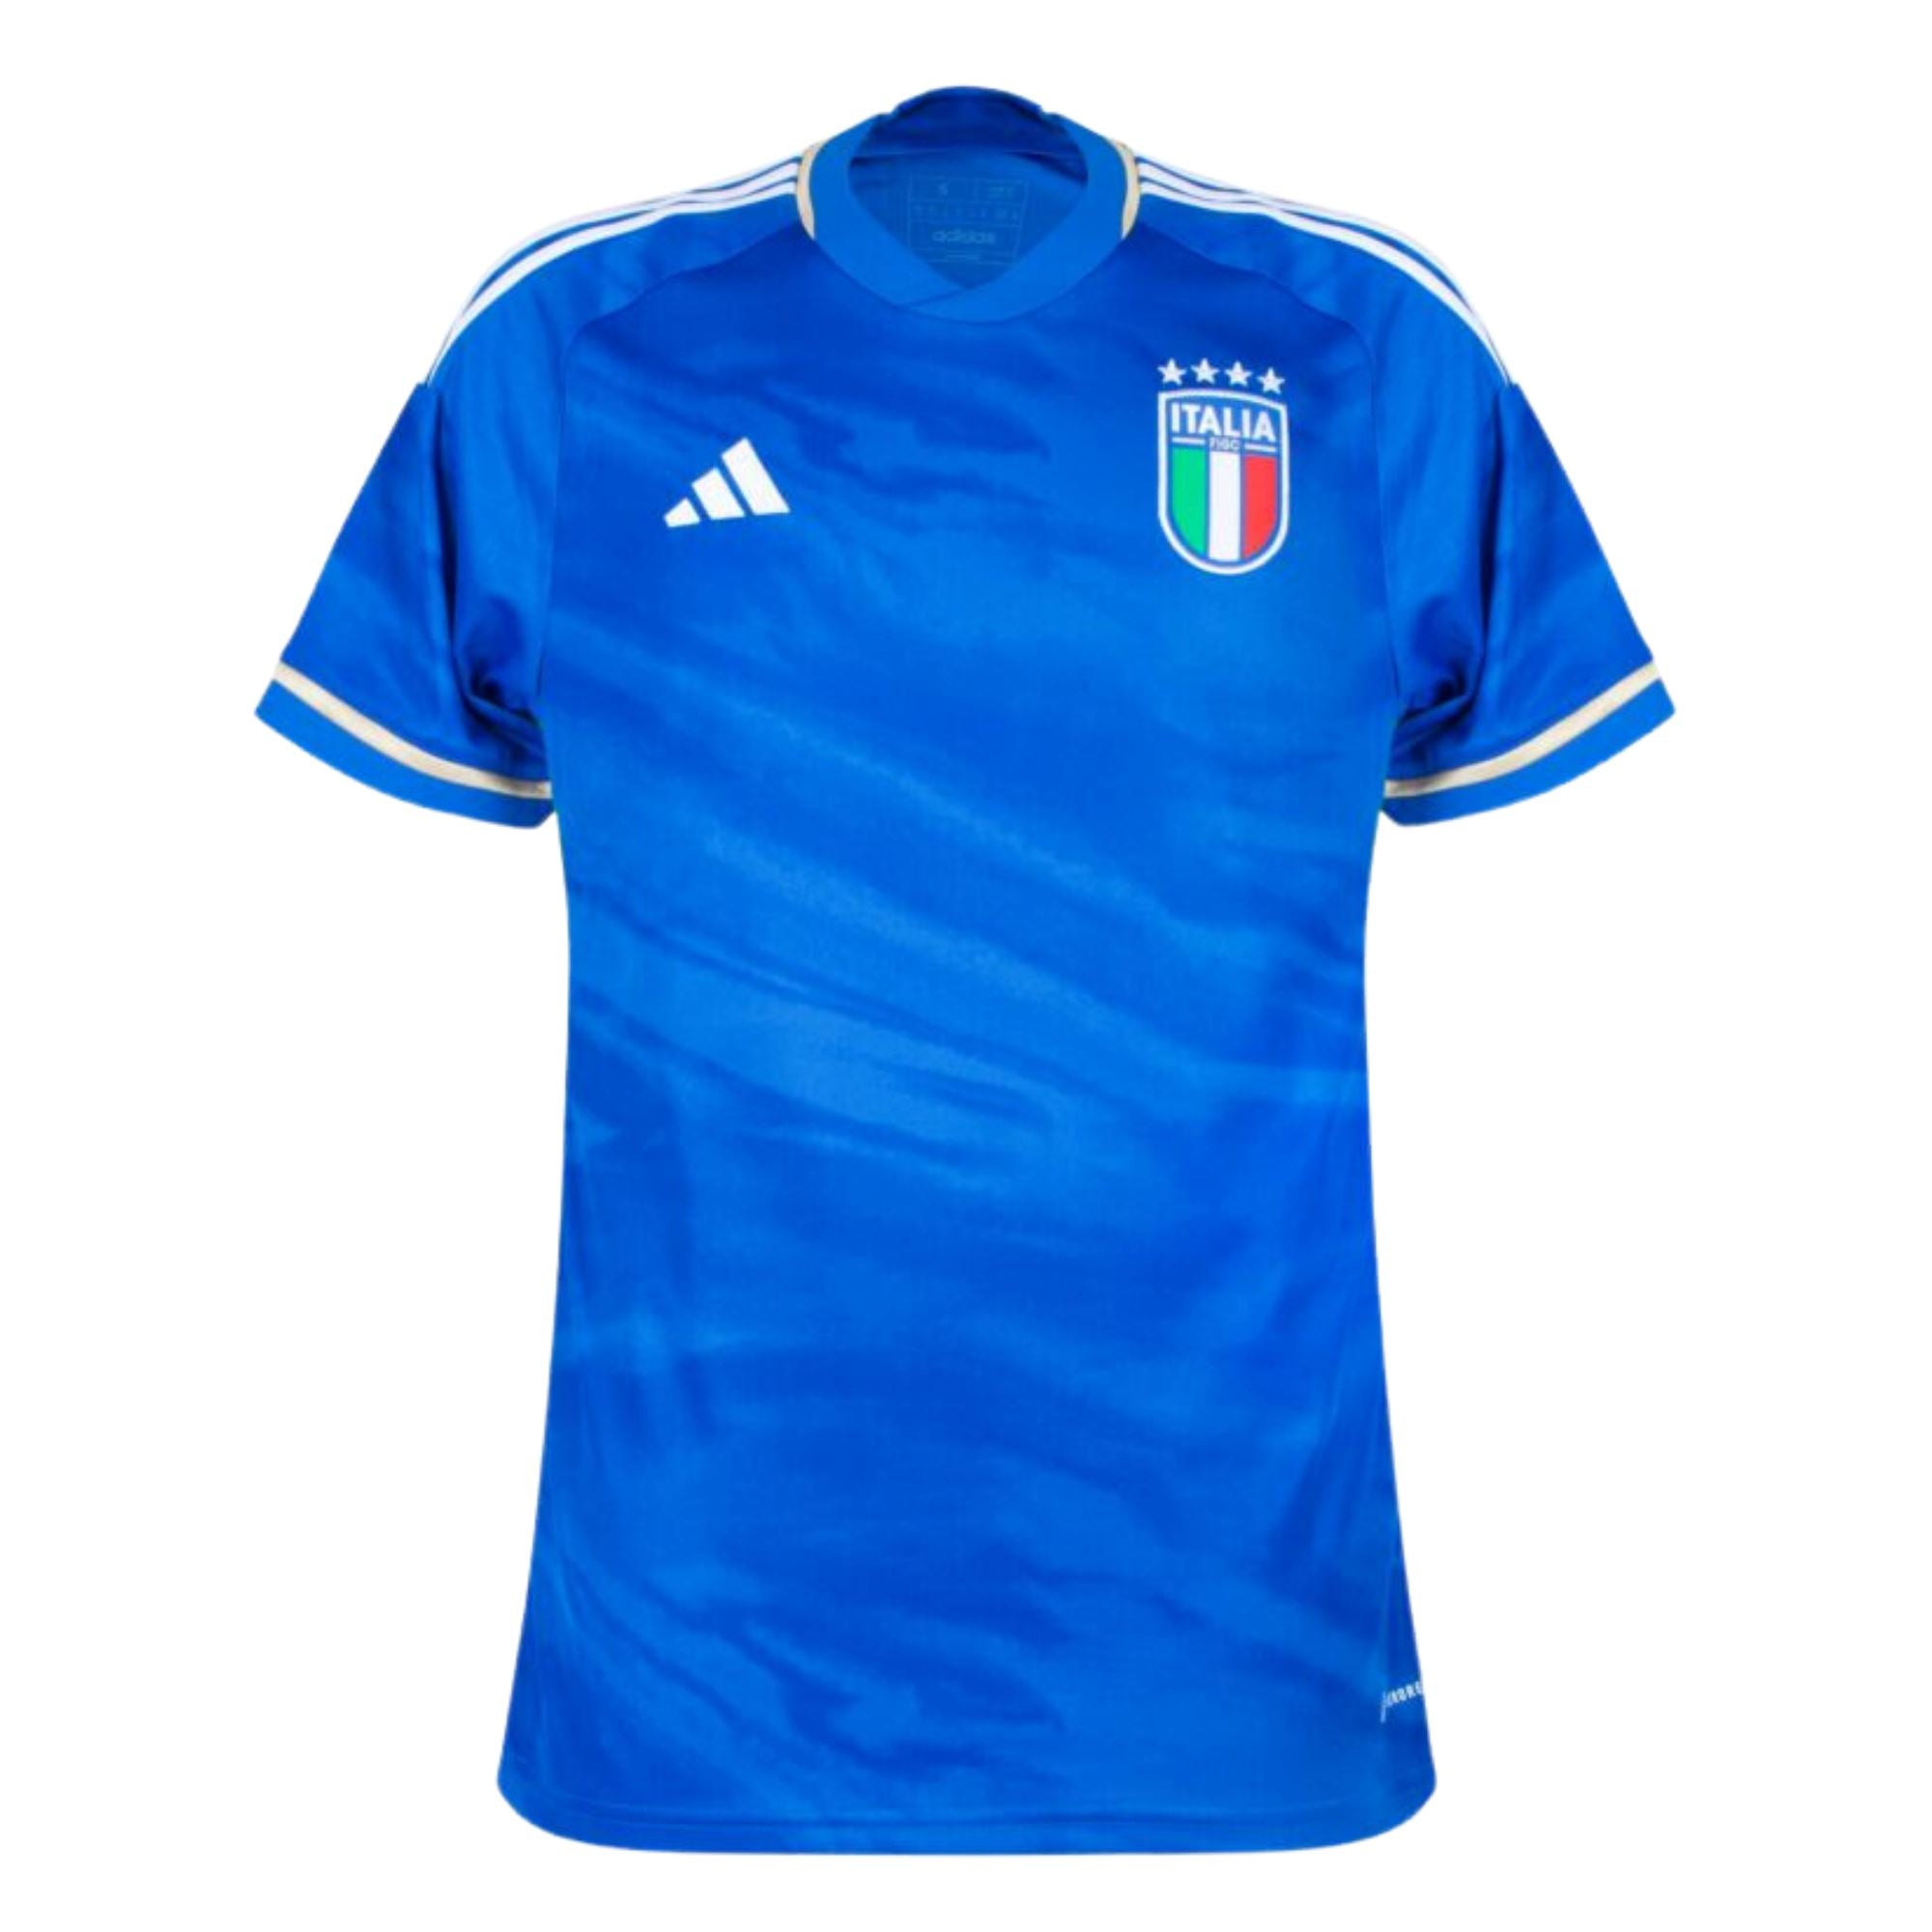 Italy Home Jersey 23/24 Euro 2024 Qualifying Patches - ADIDAS